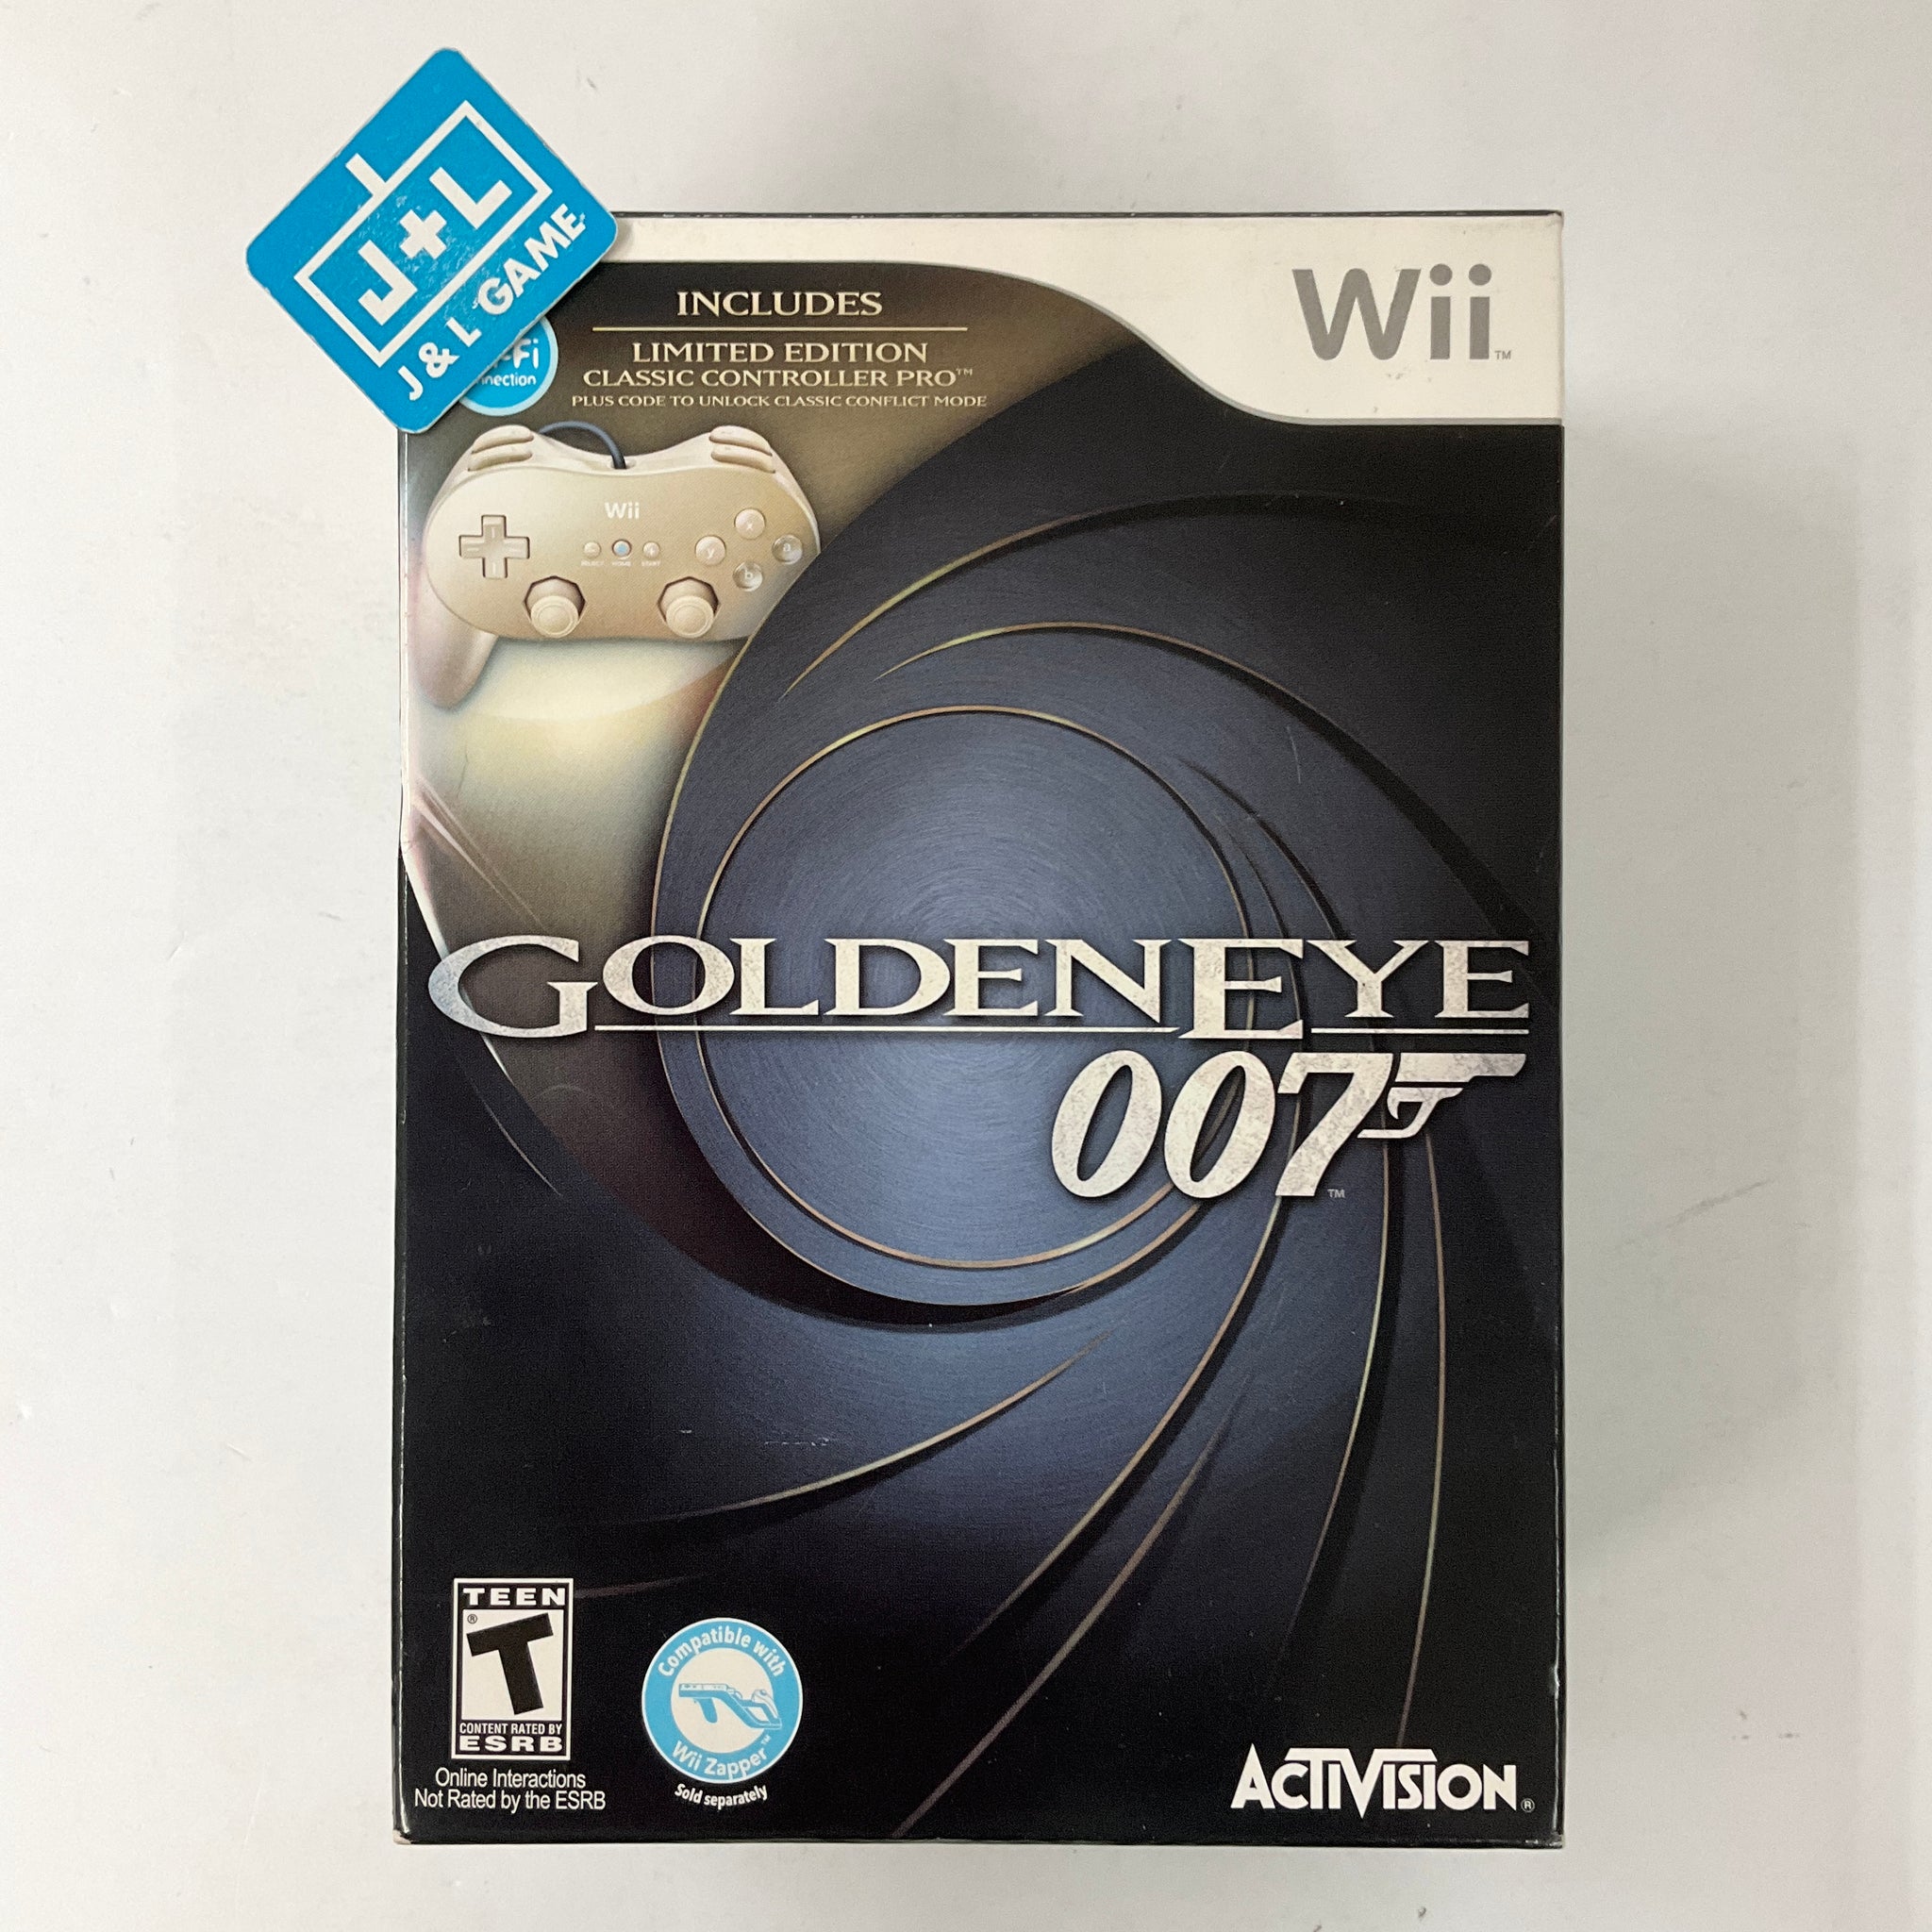  GoldenEye 007 (Wii) by ACTIVISION : Video Games